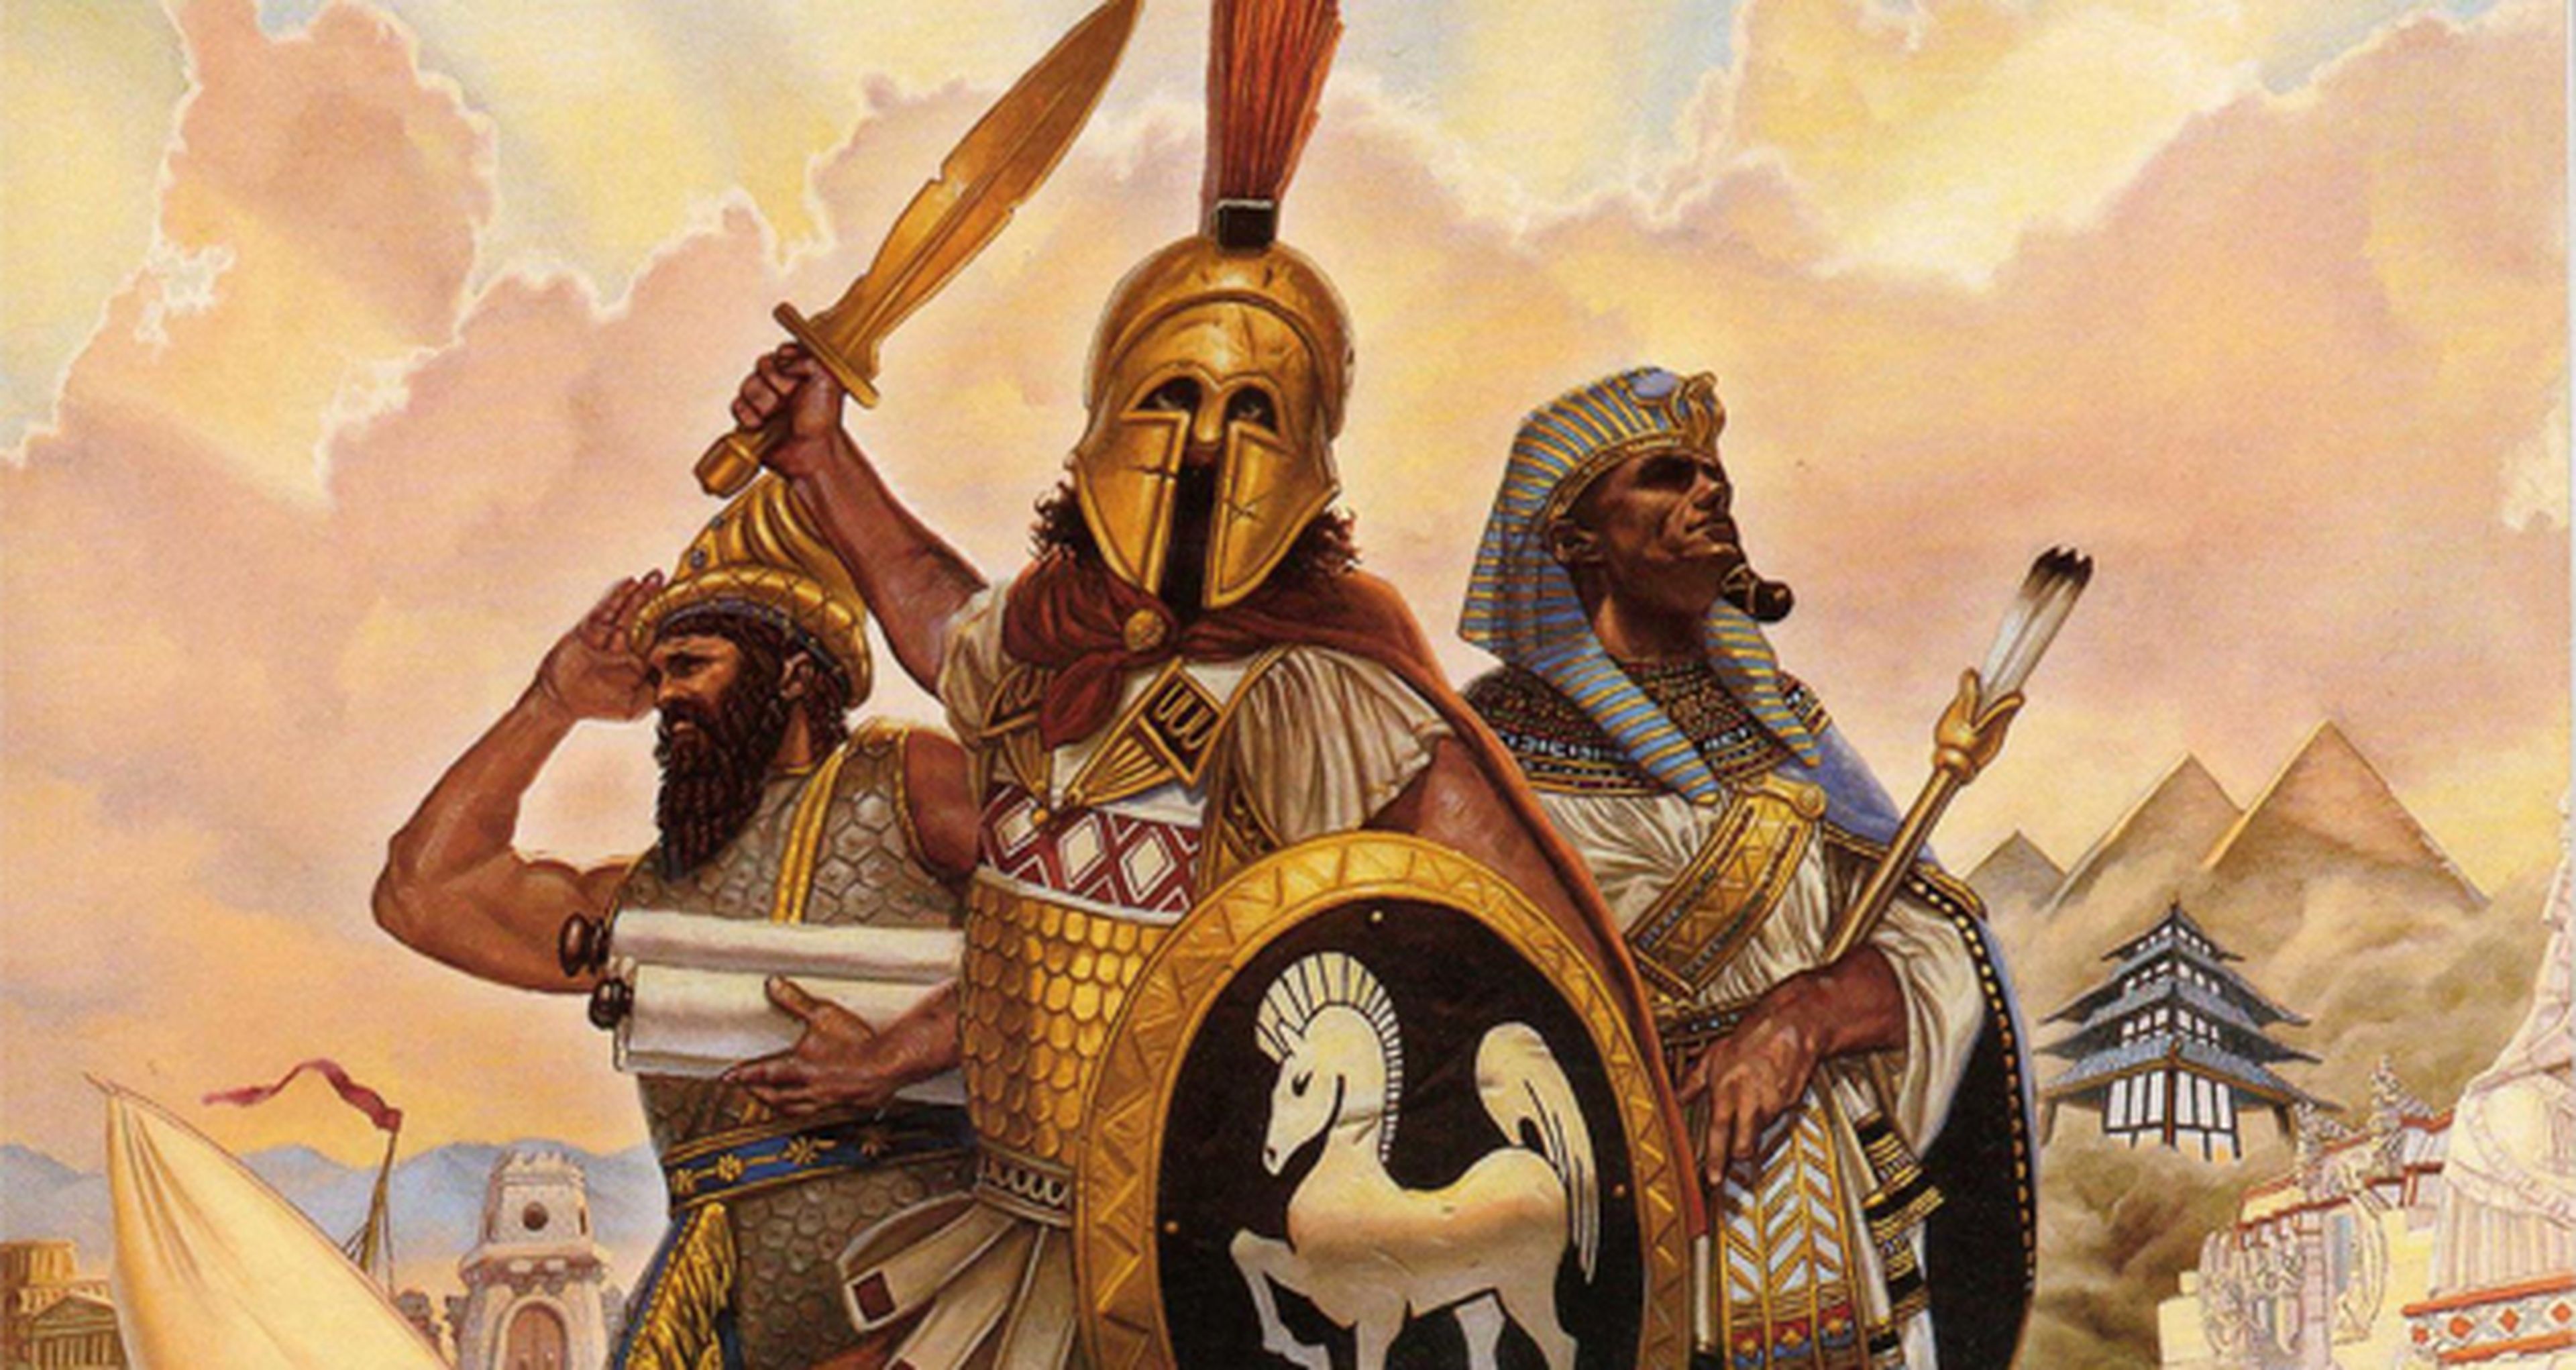 Age of Empires se pasa a iOS, Android y Windows Phone